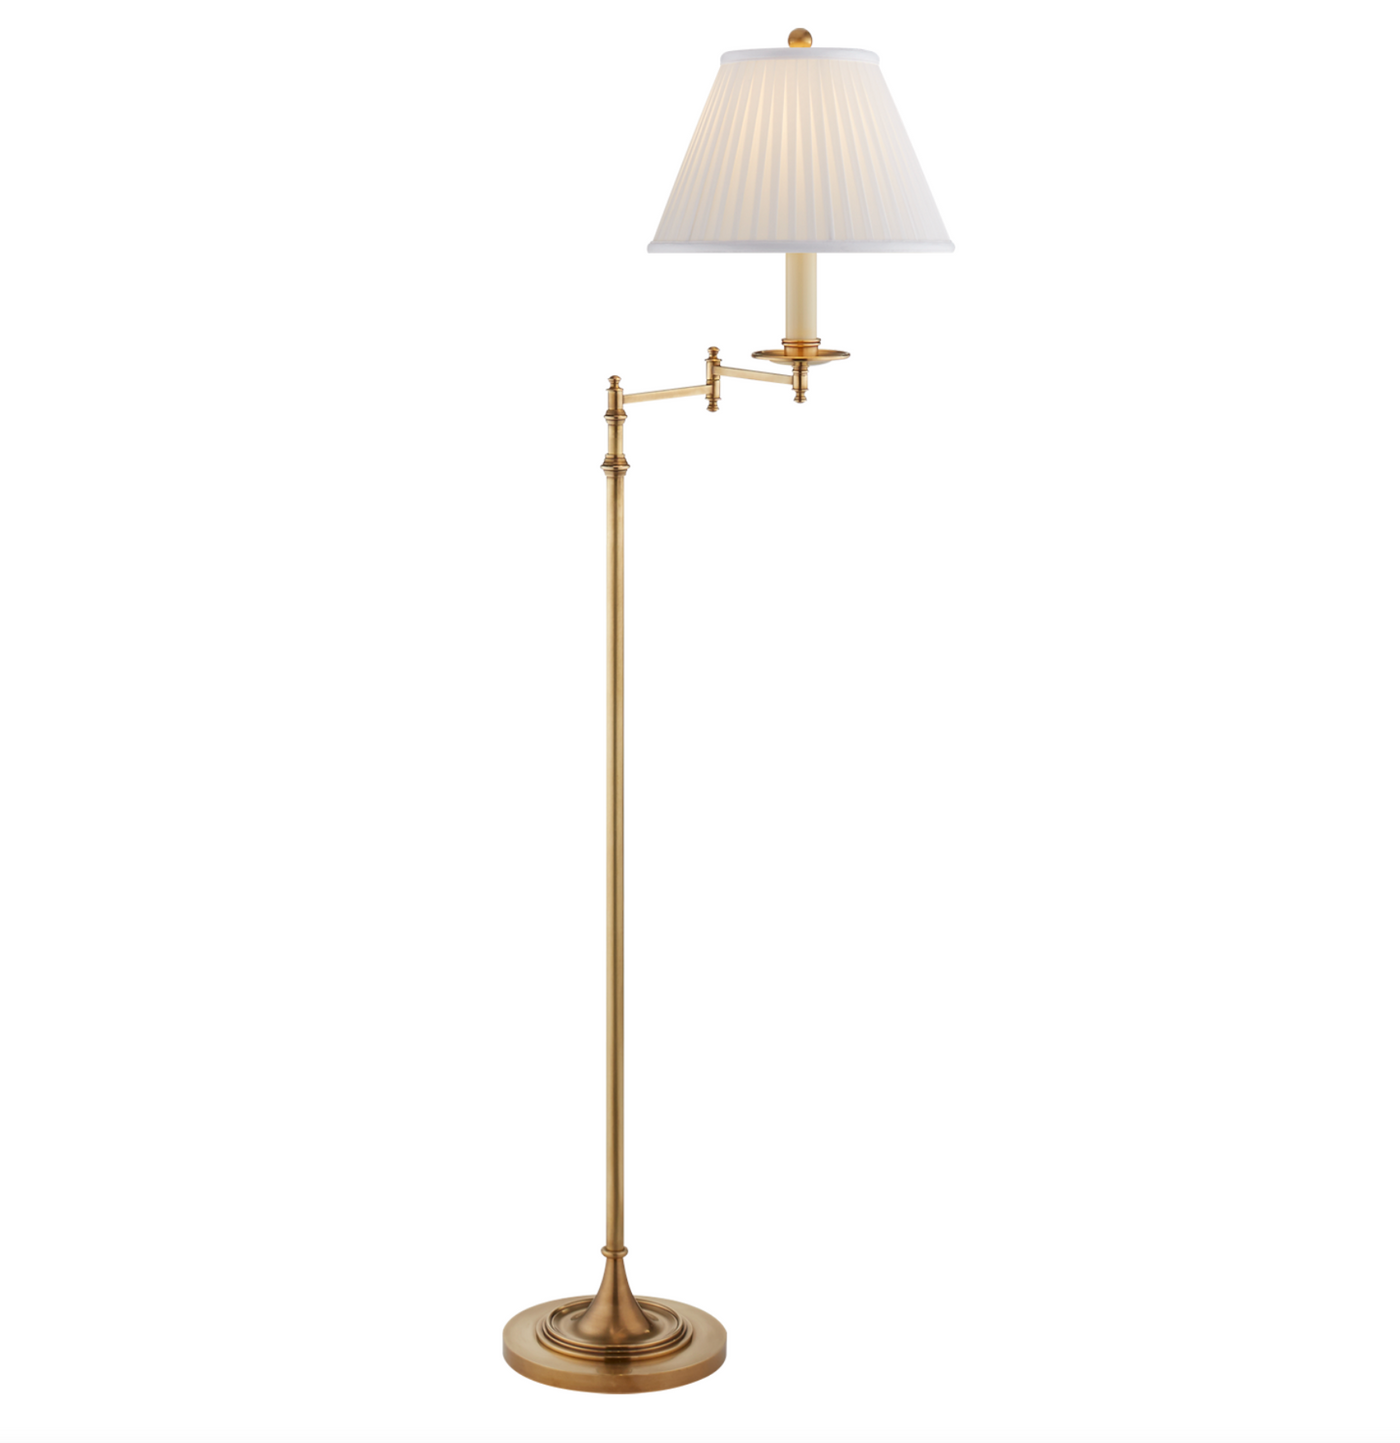 Swing-Arm Floor Lamp in Antique-Burnished Brass Finish | Newport Lamp And Shade | Located in Newport, RI